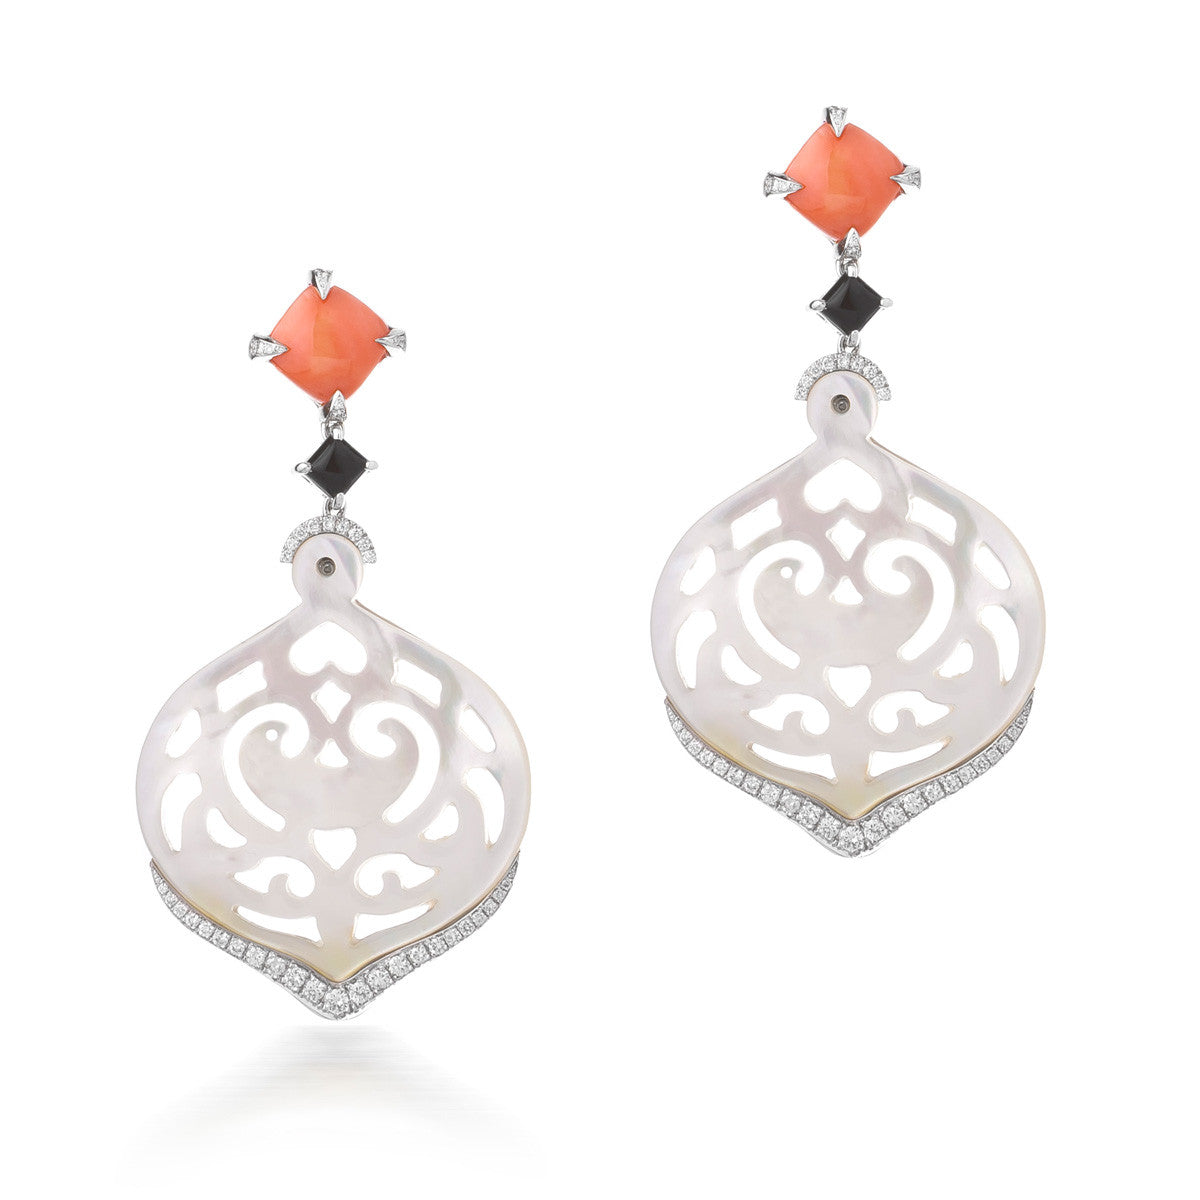 Carved Mother of Pearl and Coral Earrings